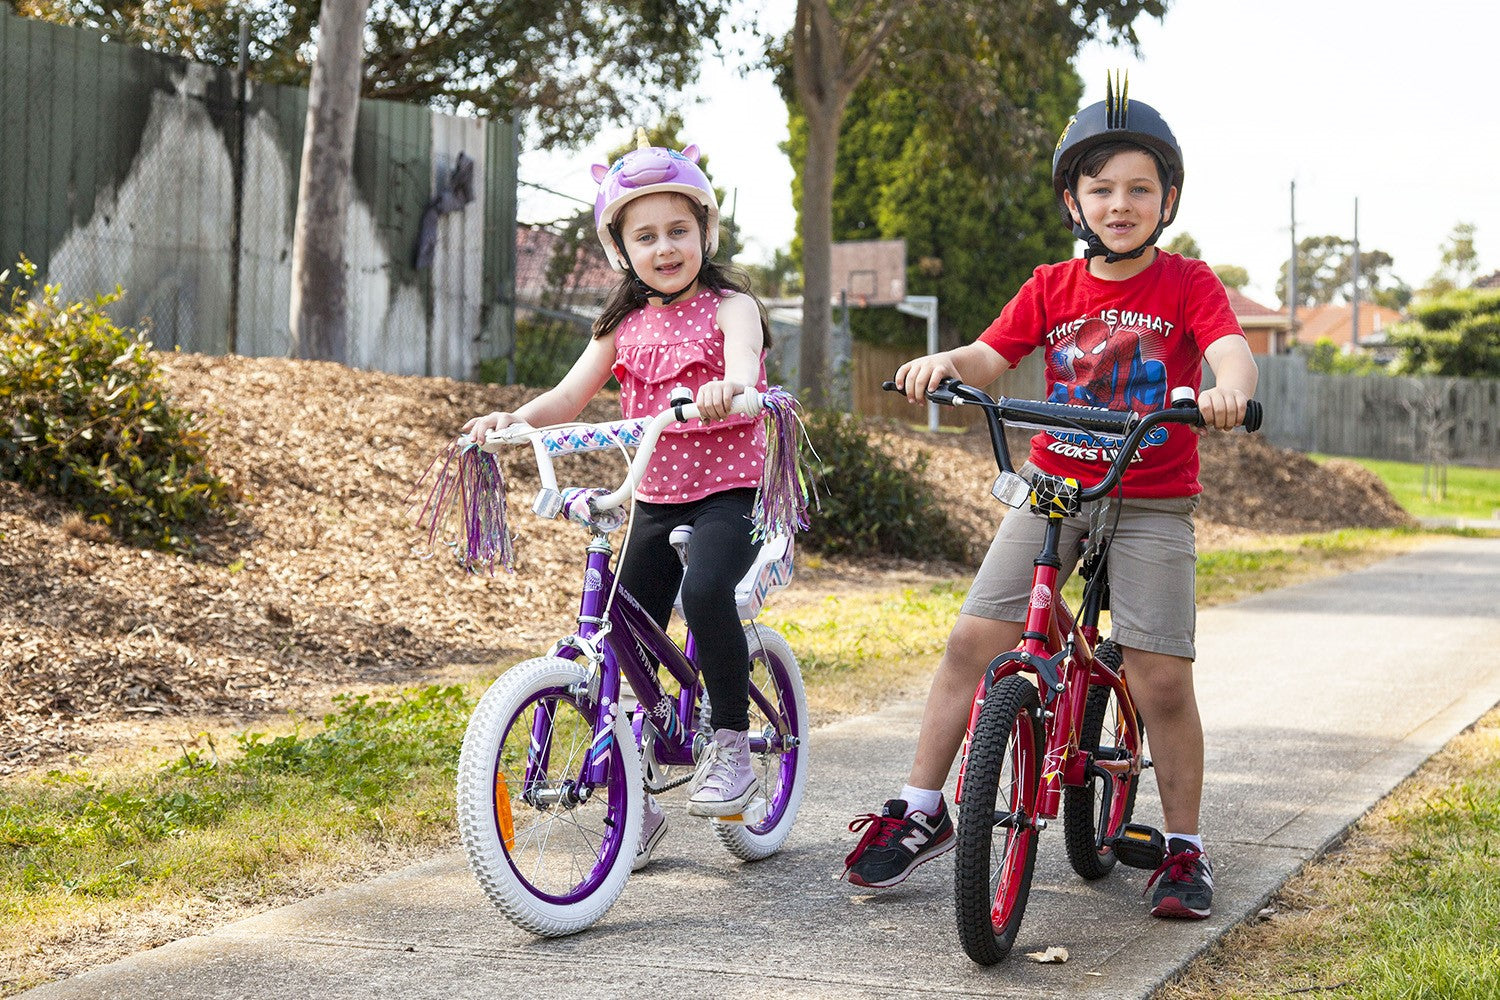 Family Adventures on Two Wheels: Planning Bike Rides with Kids